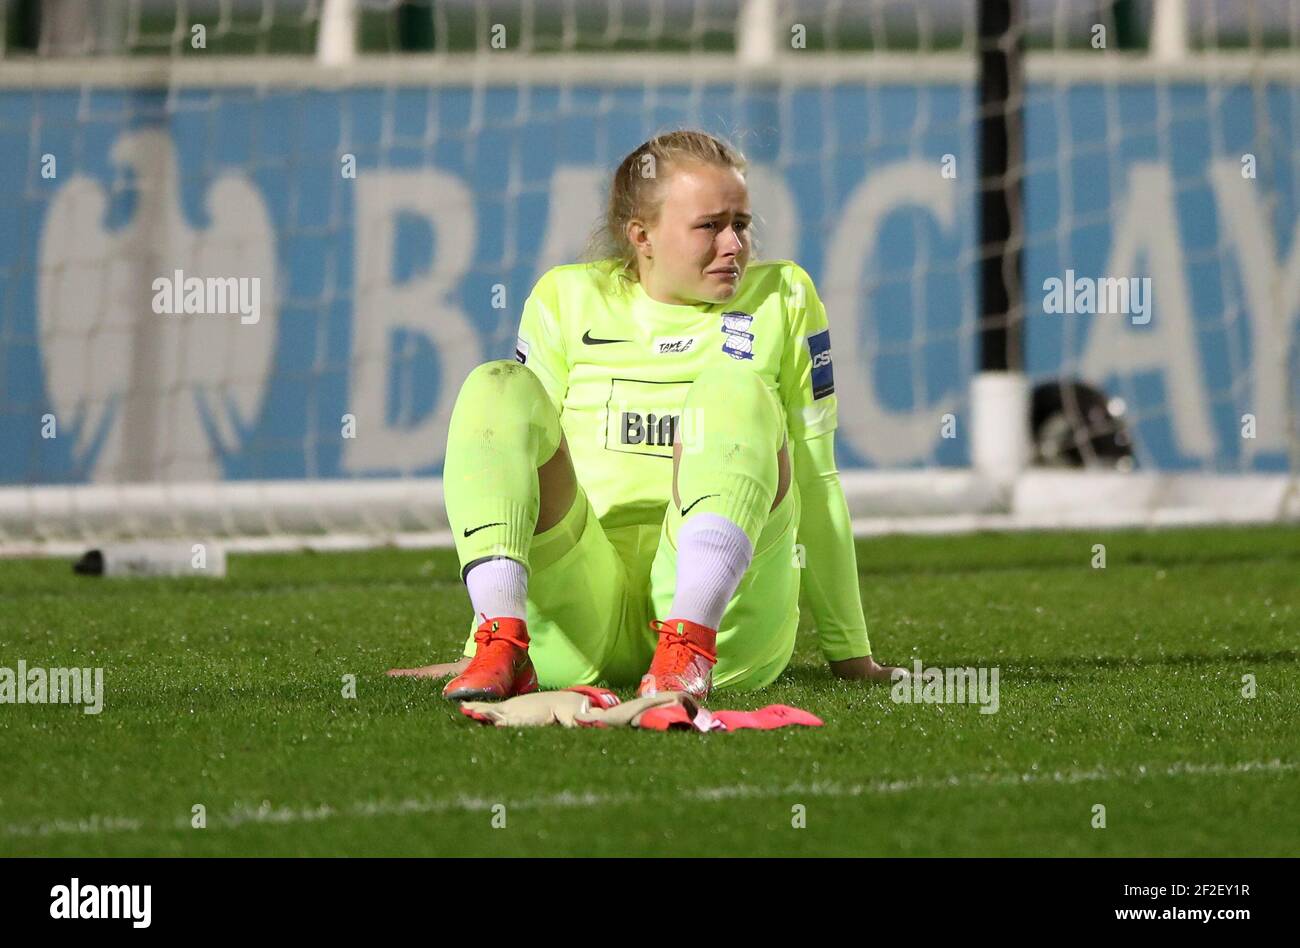 Birmingham City goalkeeper Hannah Hampton looks dejected during the FA Women's Super League match at the SportNation.bet Stadium, Solihull. Picture date: Thursday March 11, 2021. Stock Photo